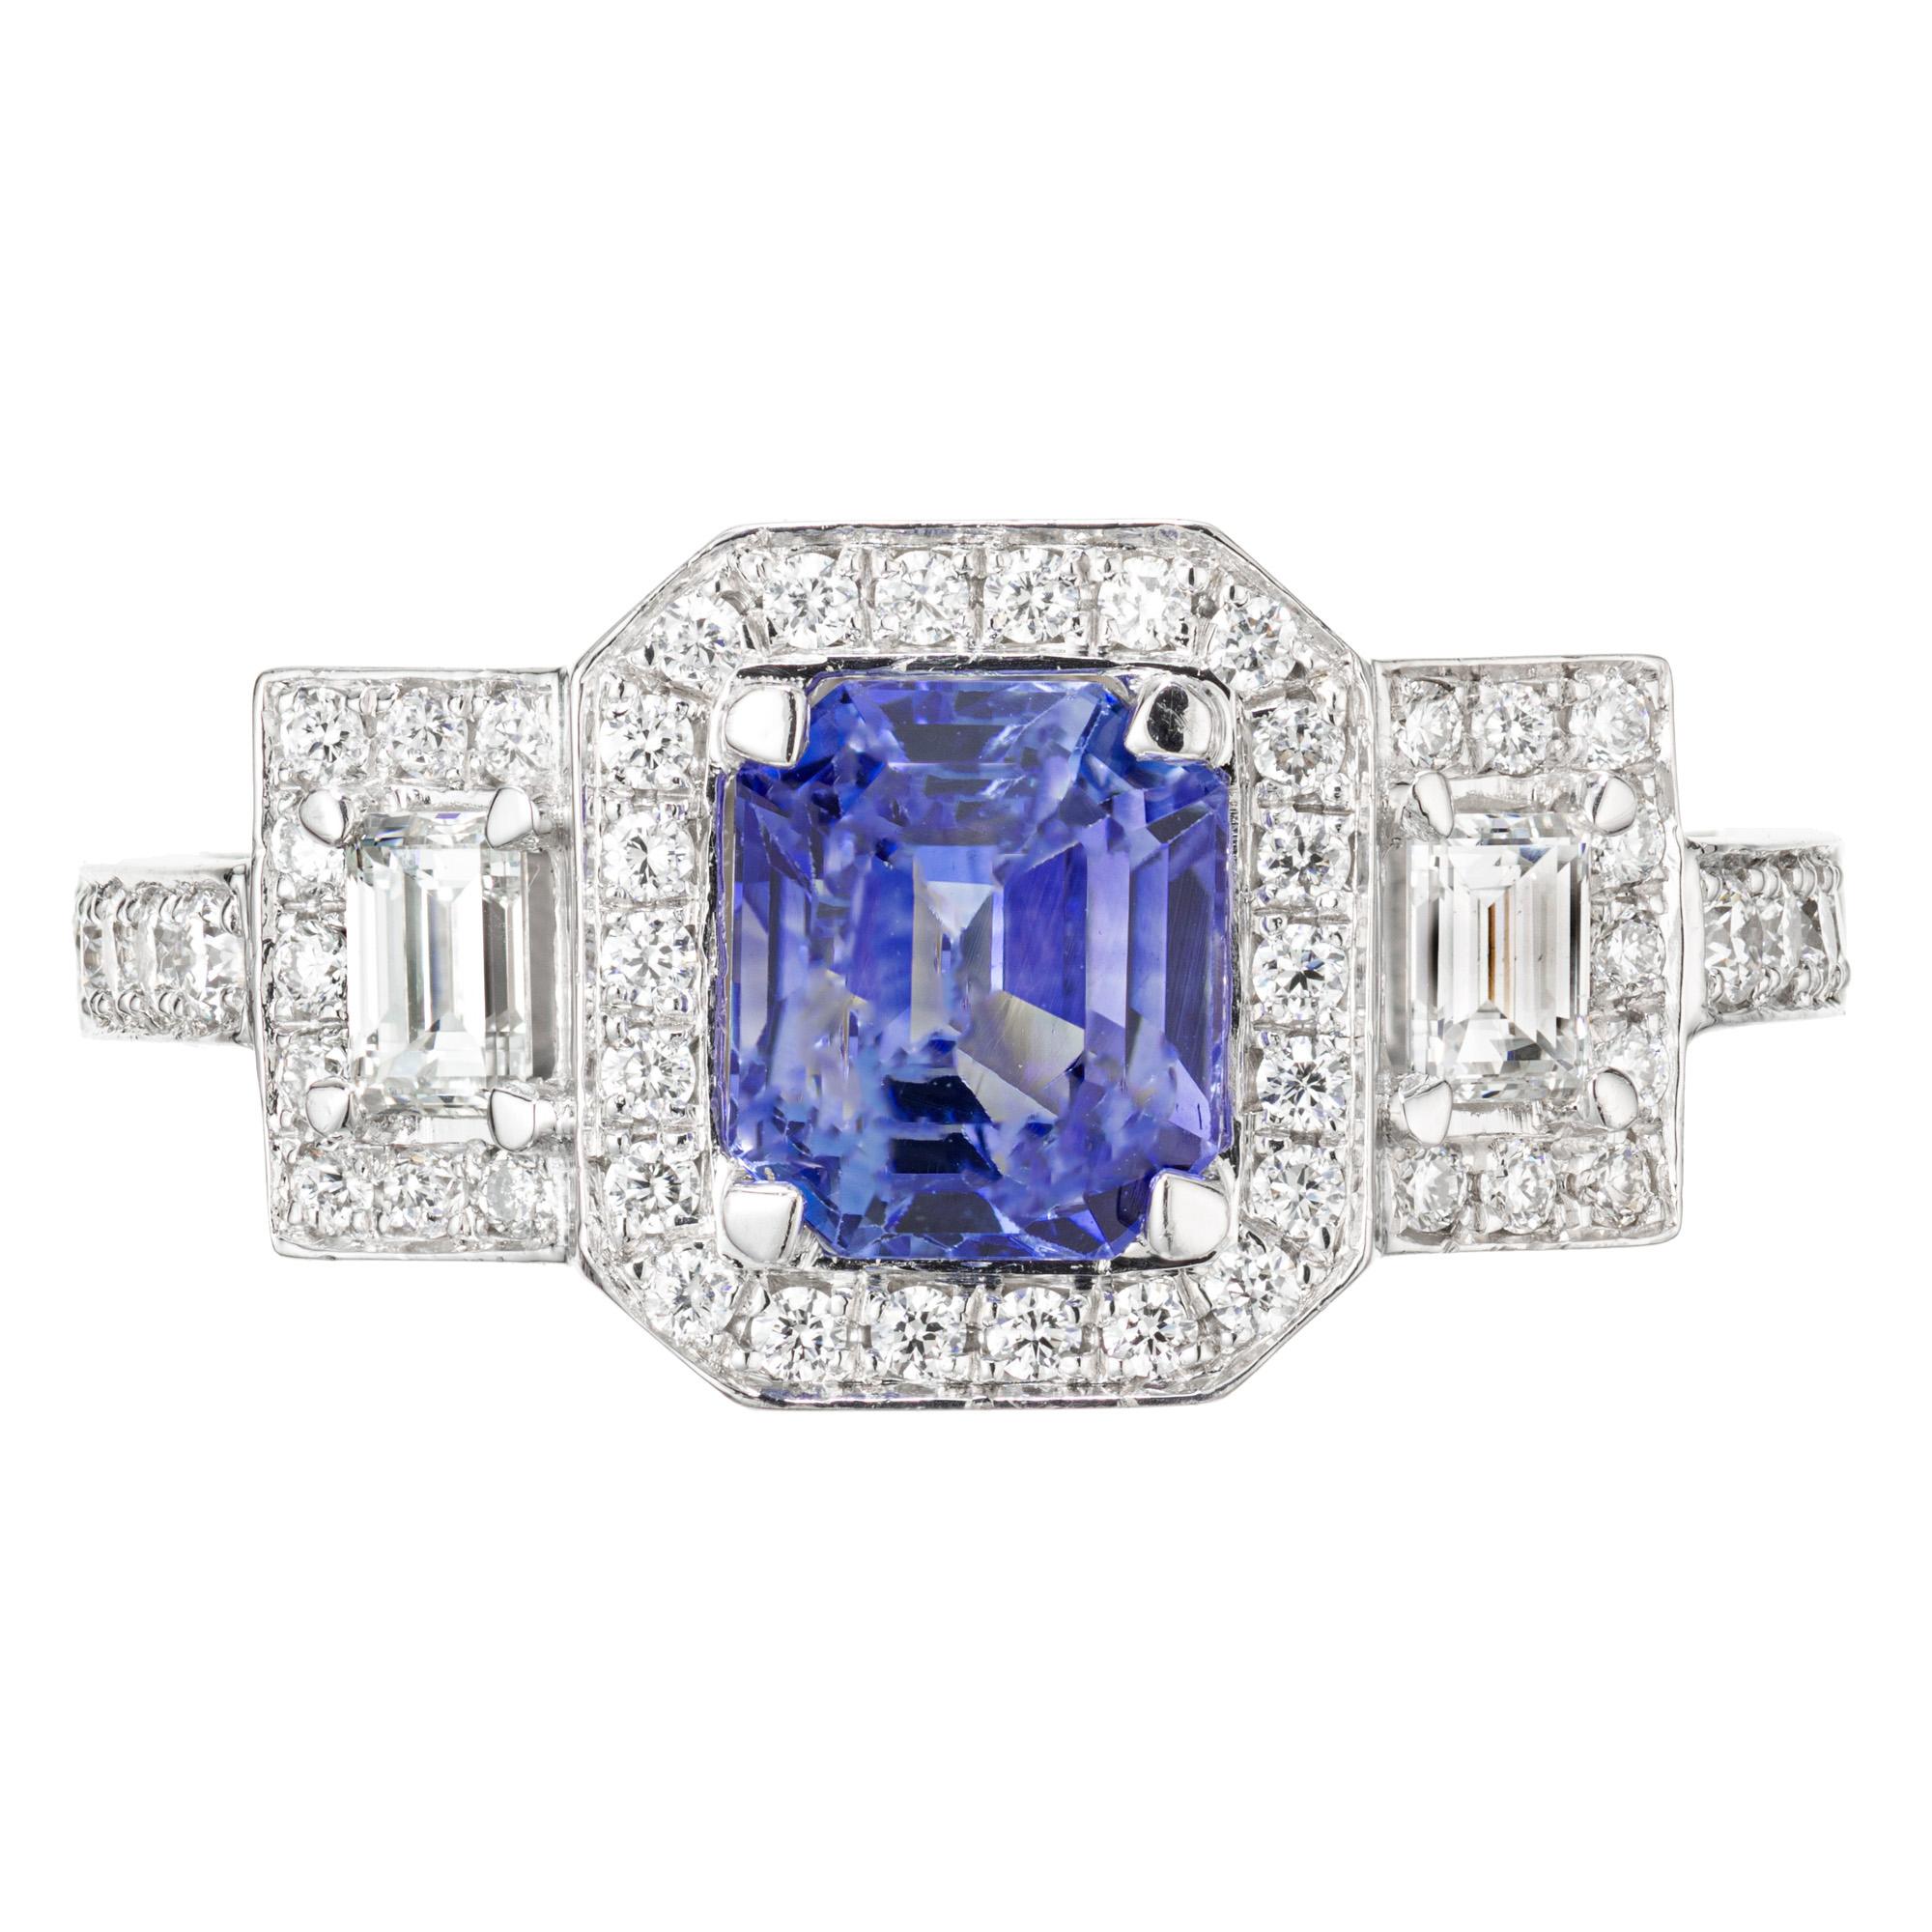 Sapphire and diamond three-stone engagement ring. AGL certified emerald cut sapphire center stone, set in a platinum triple diamond halo setting with 2 baguette side diamonds. Sapphire is certified as natural corundum, simple heat only. Designed and